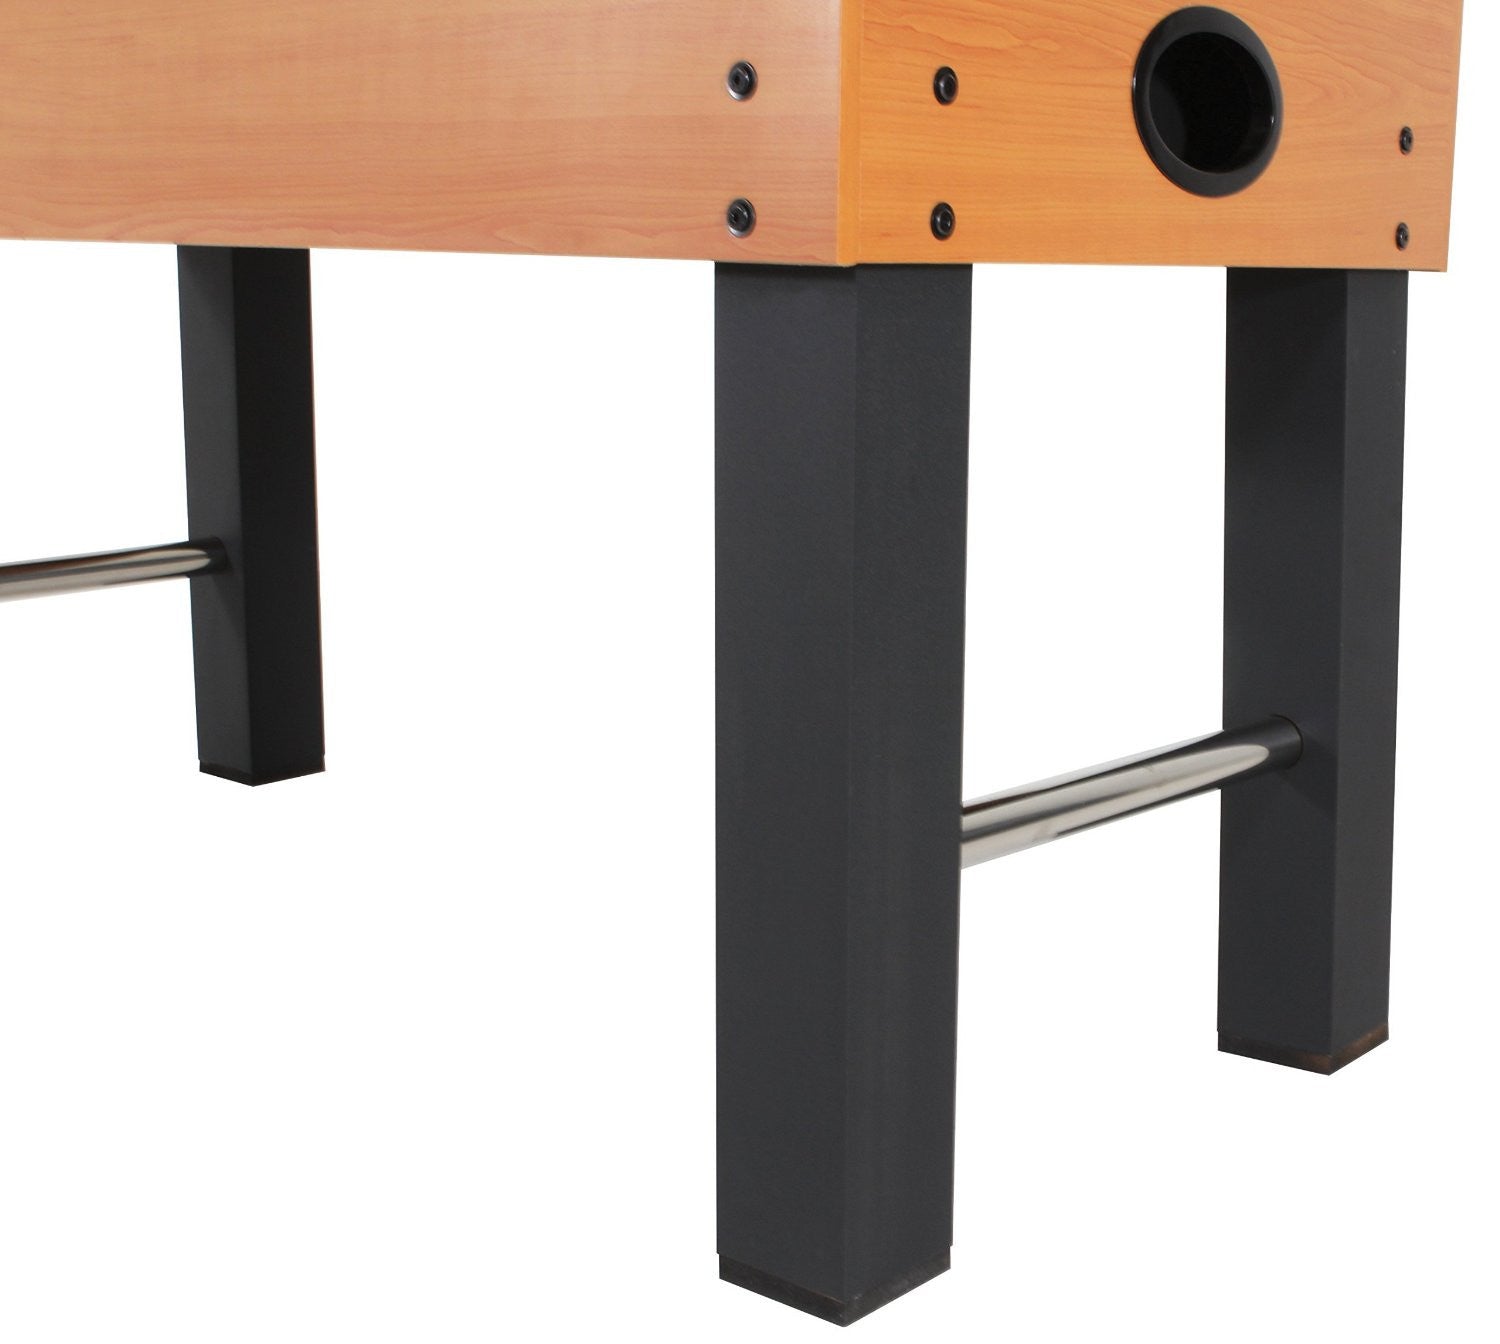 Table legs of DMI Sporst Foosball Table called American Legend 52" which is available at Foosball Planet